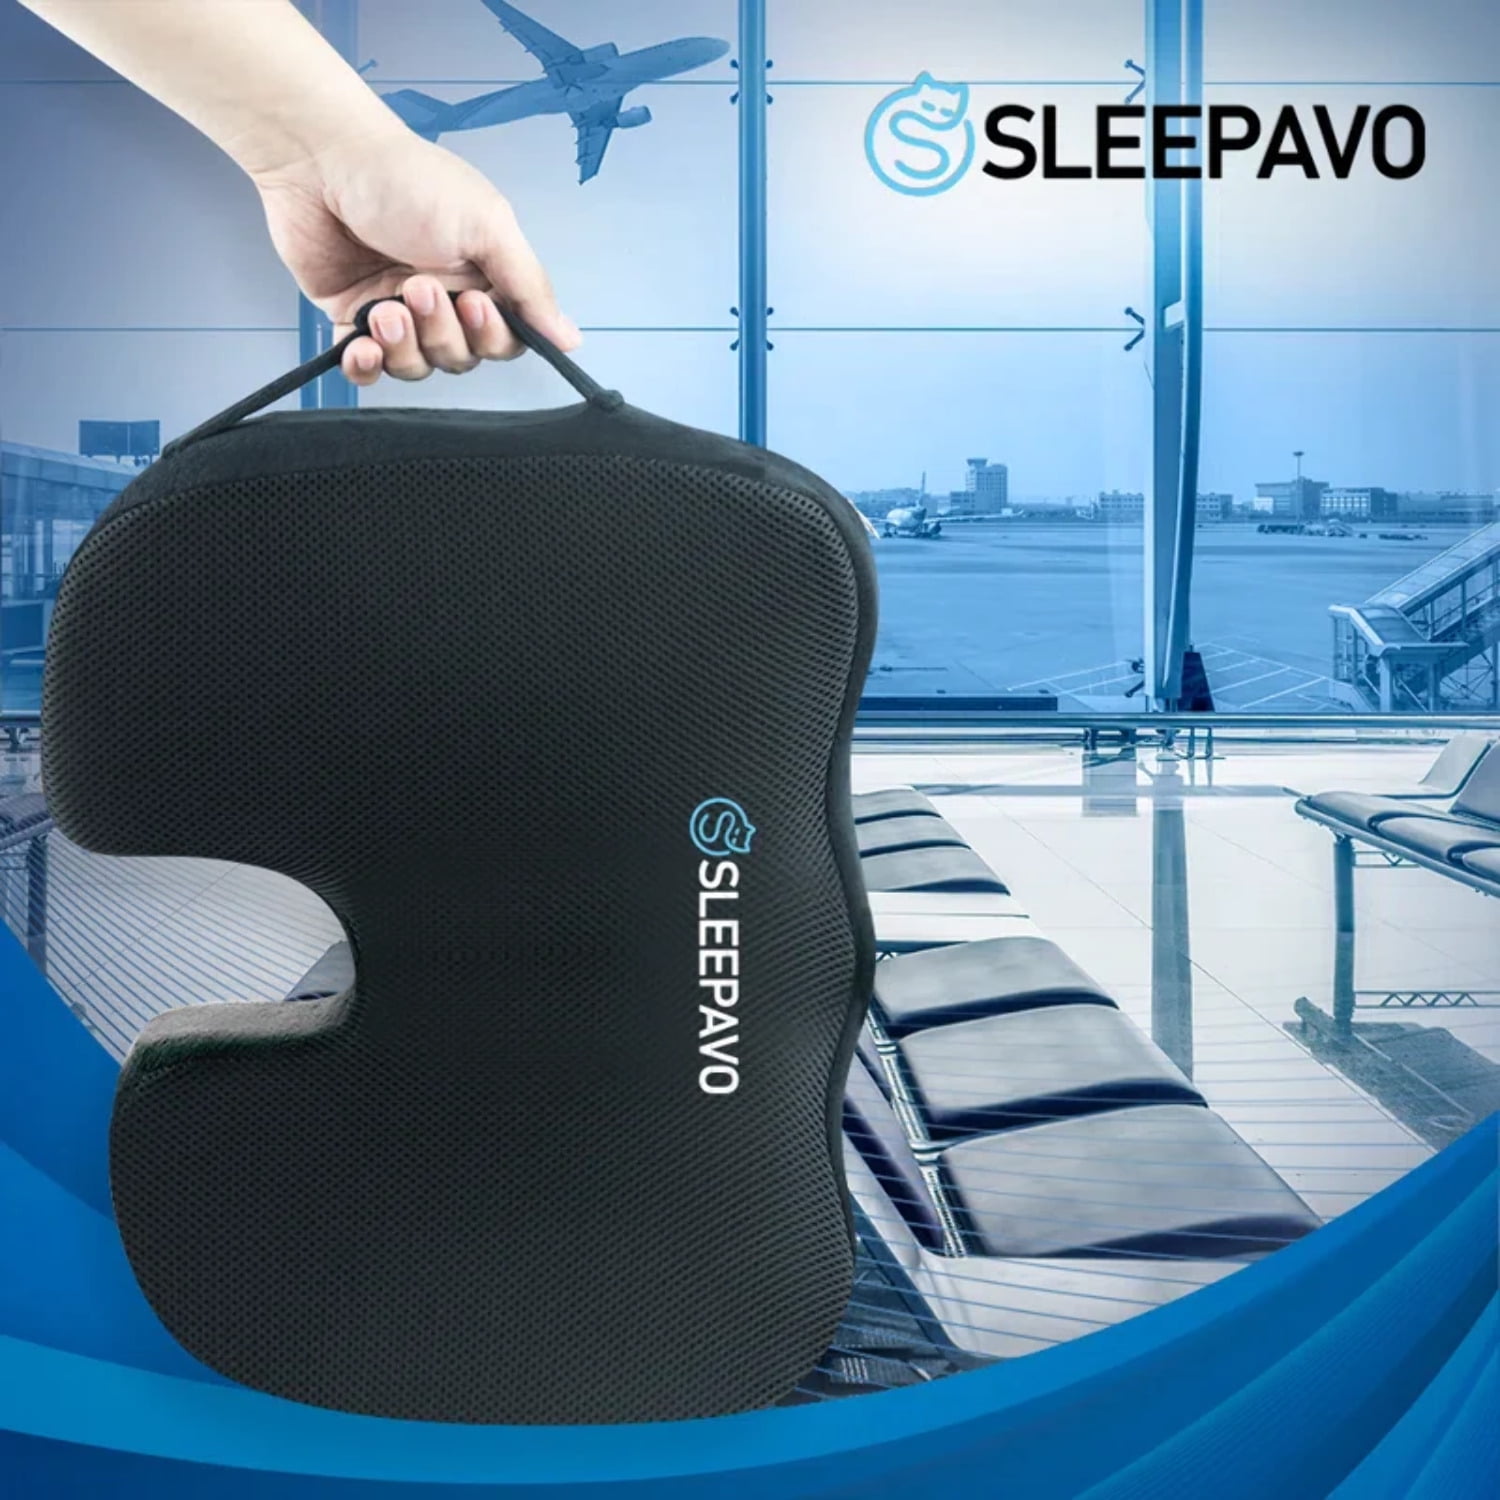 VIGBOAT Office Chair Cushion, Memory Foam Seat Cushion for Tailbone Pain  Relief, Ergonomic Butt Cushion for Sciatica, Back Pain, Butt Pillow for  Long Sitting, Chair Pad for Desk, Gaming, Car Driving 